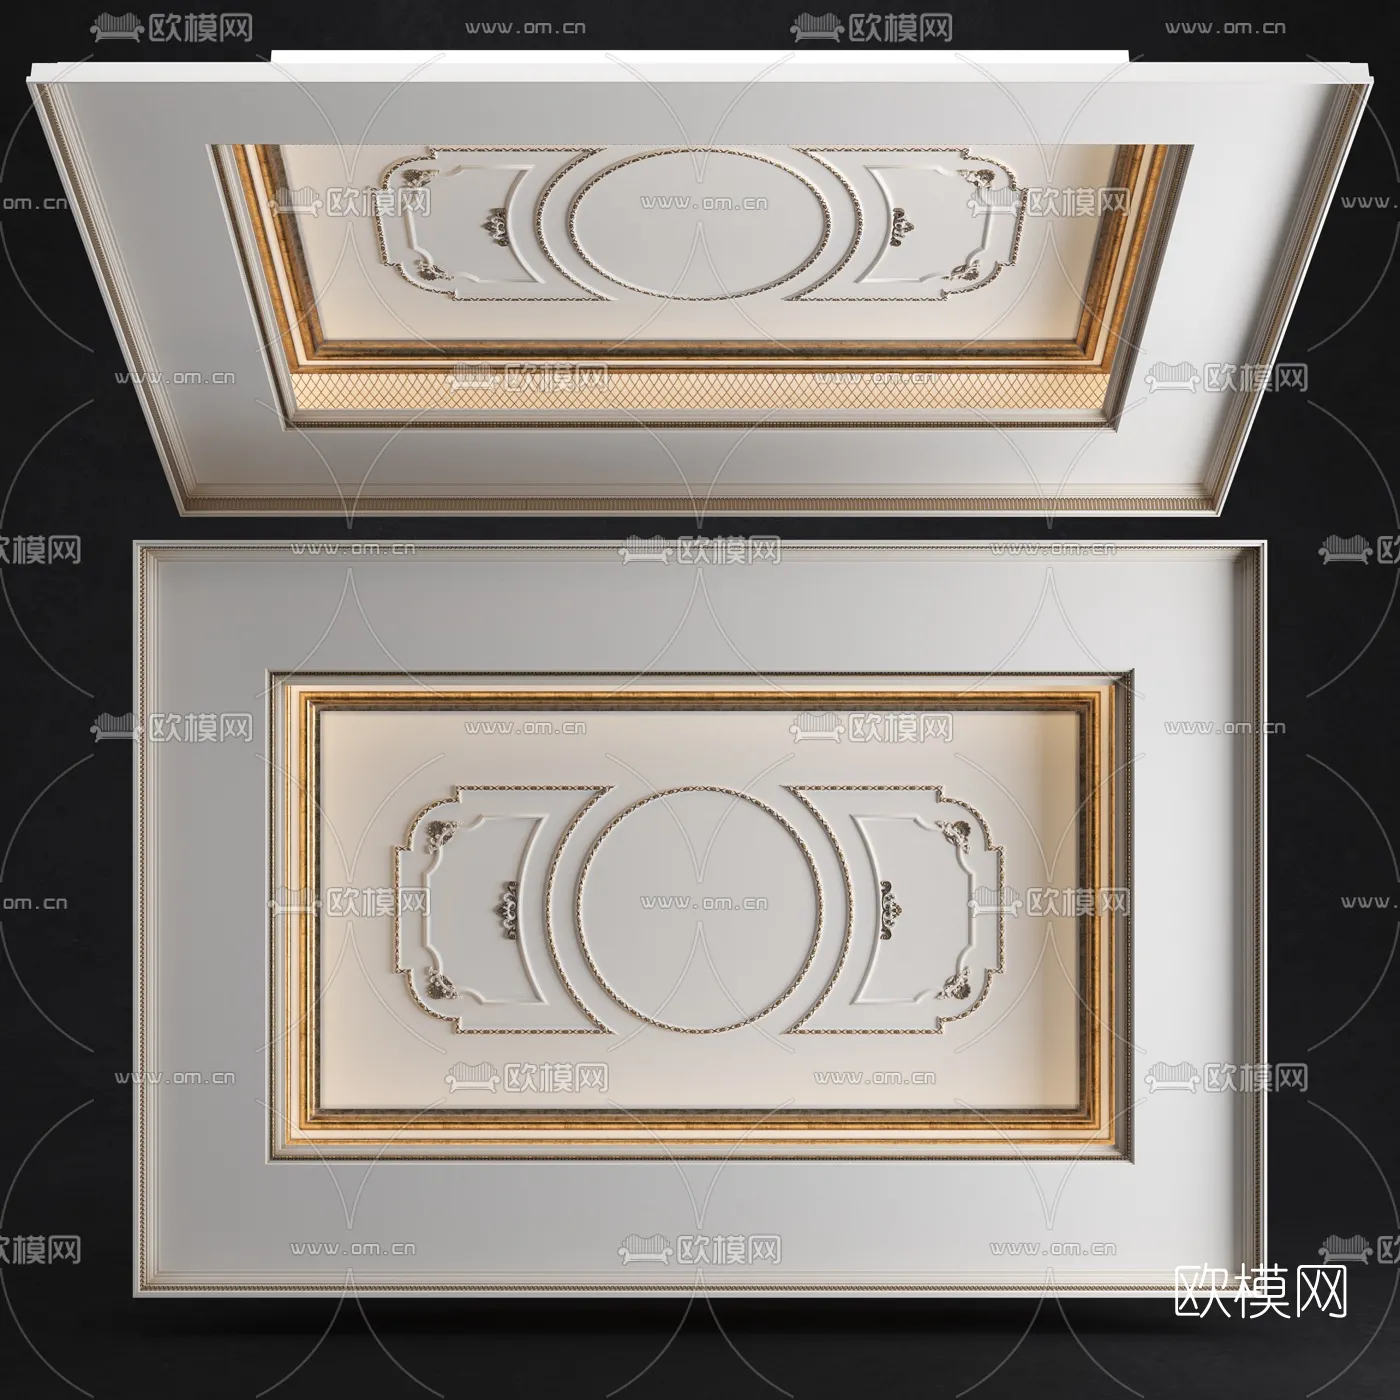 3DS MAX – DETAIL – CEILING – VRAY / CORONA – 3D MODEL – 3136